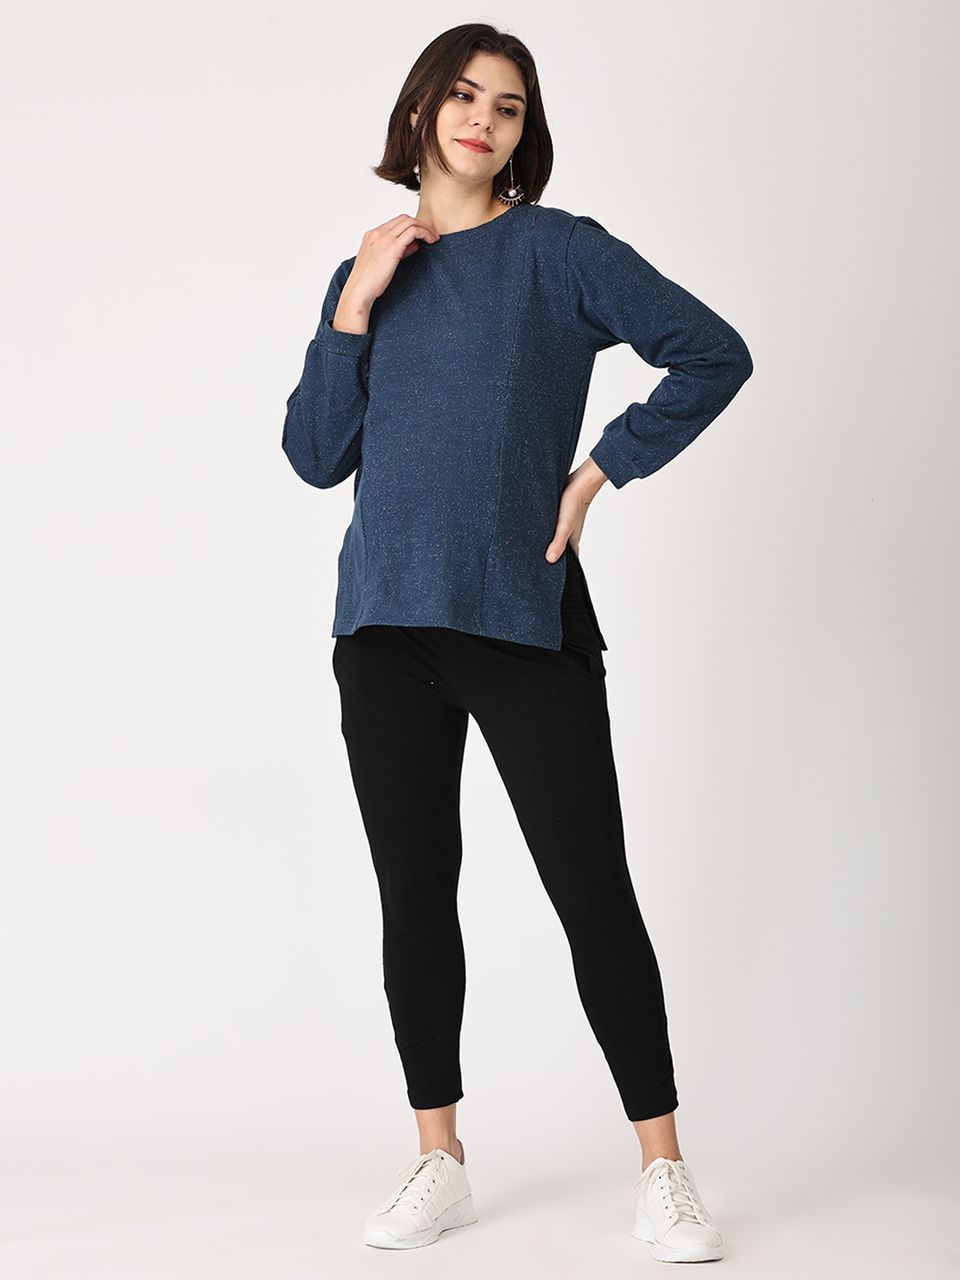 The Mom Store Combo Of Shooting Star Maternity Sweatshirt With Black Leggings